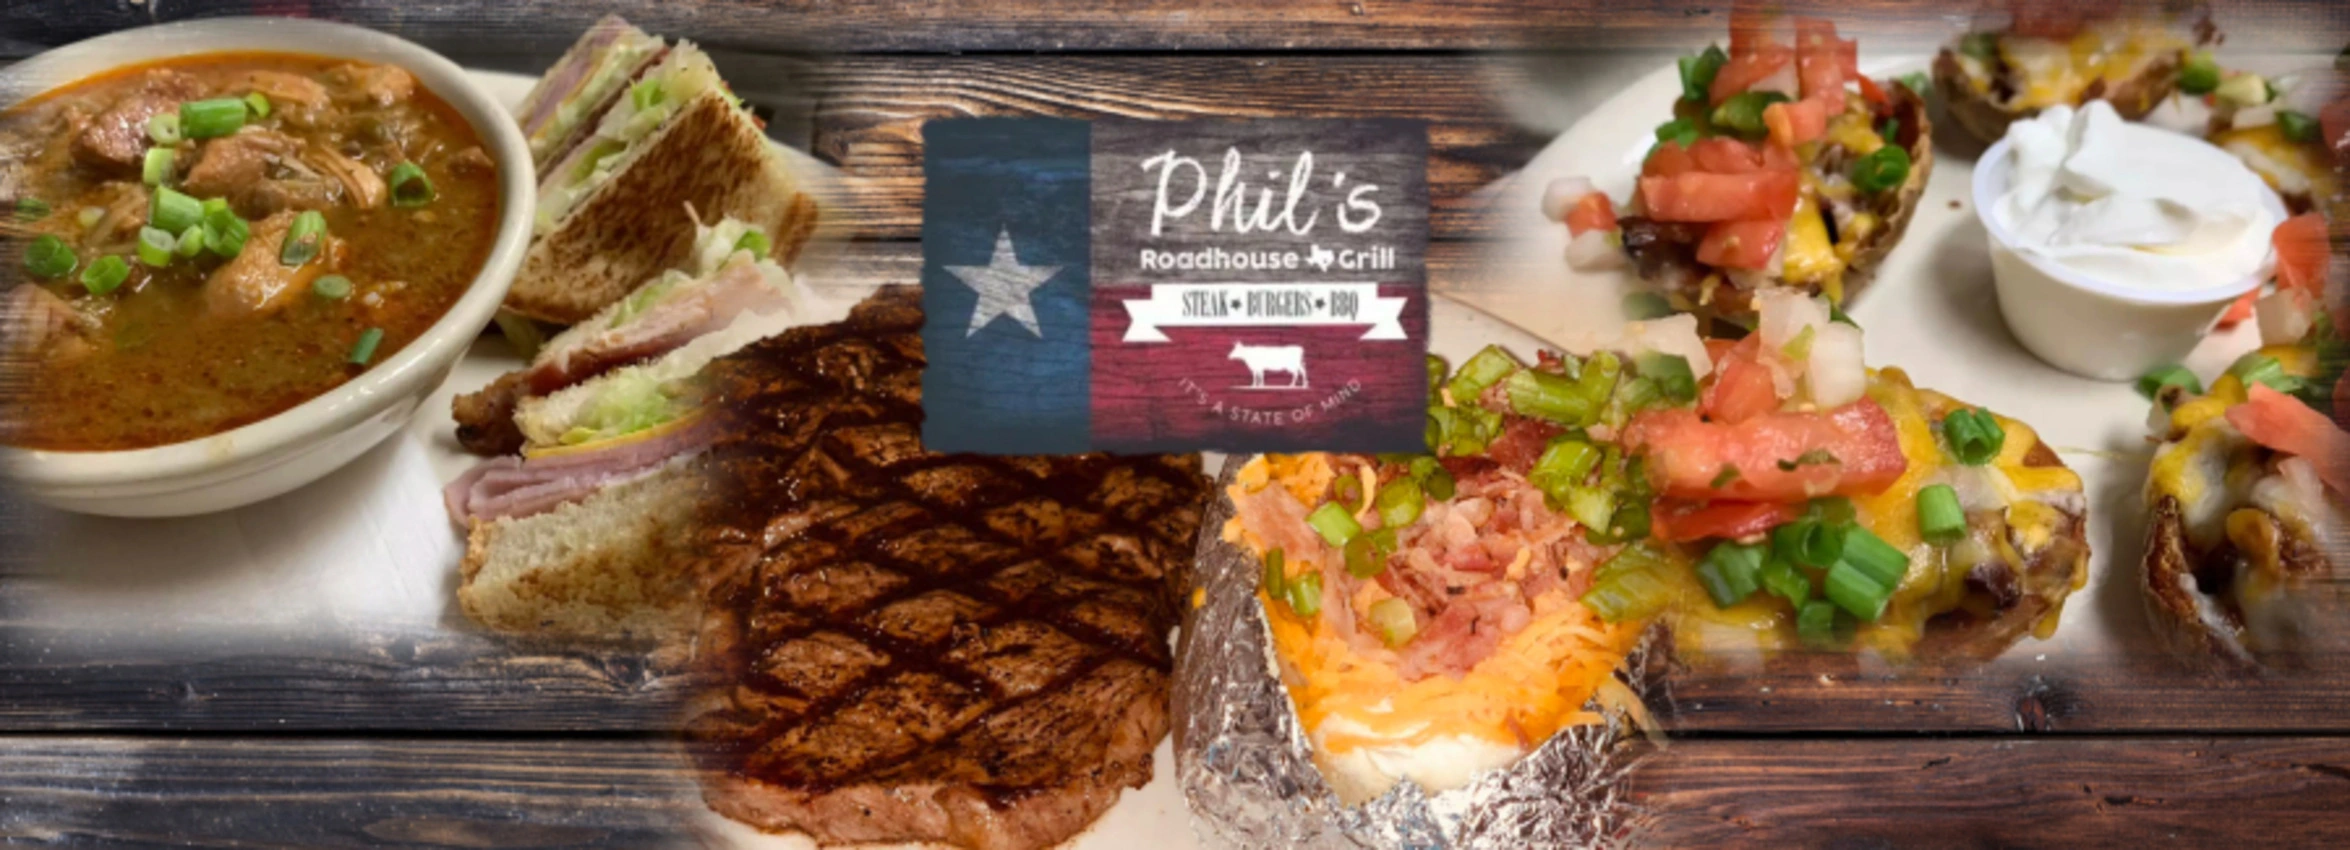 Phils-Roadhouse-and-Grill_Desktop_ET